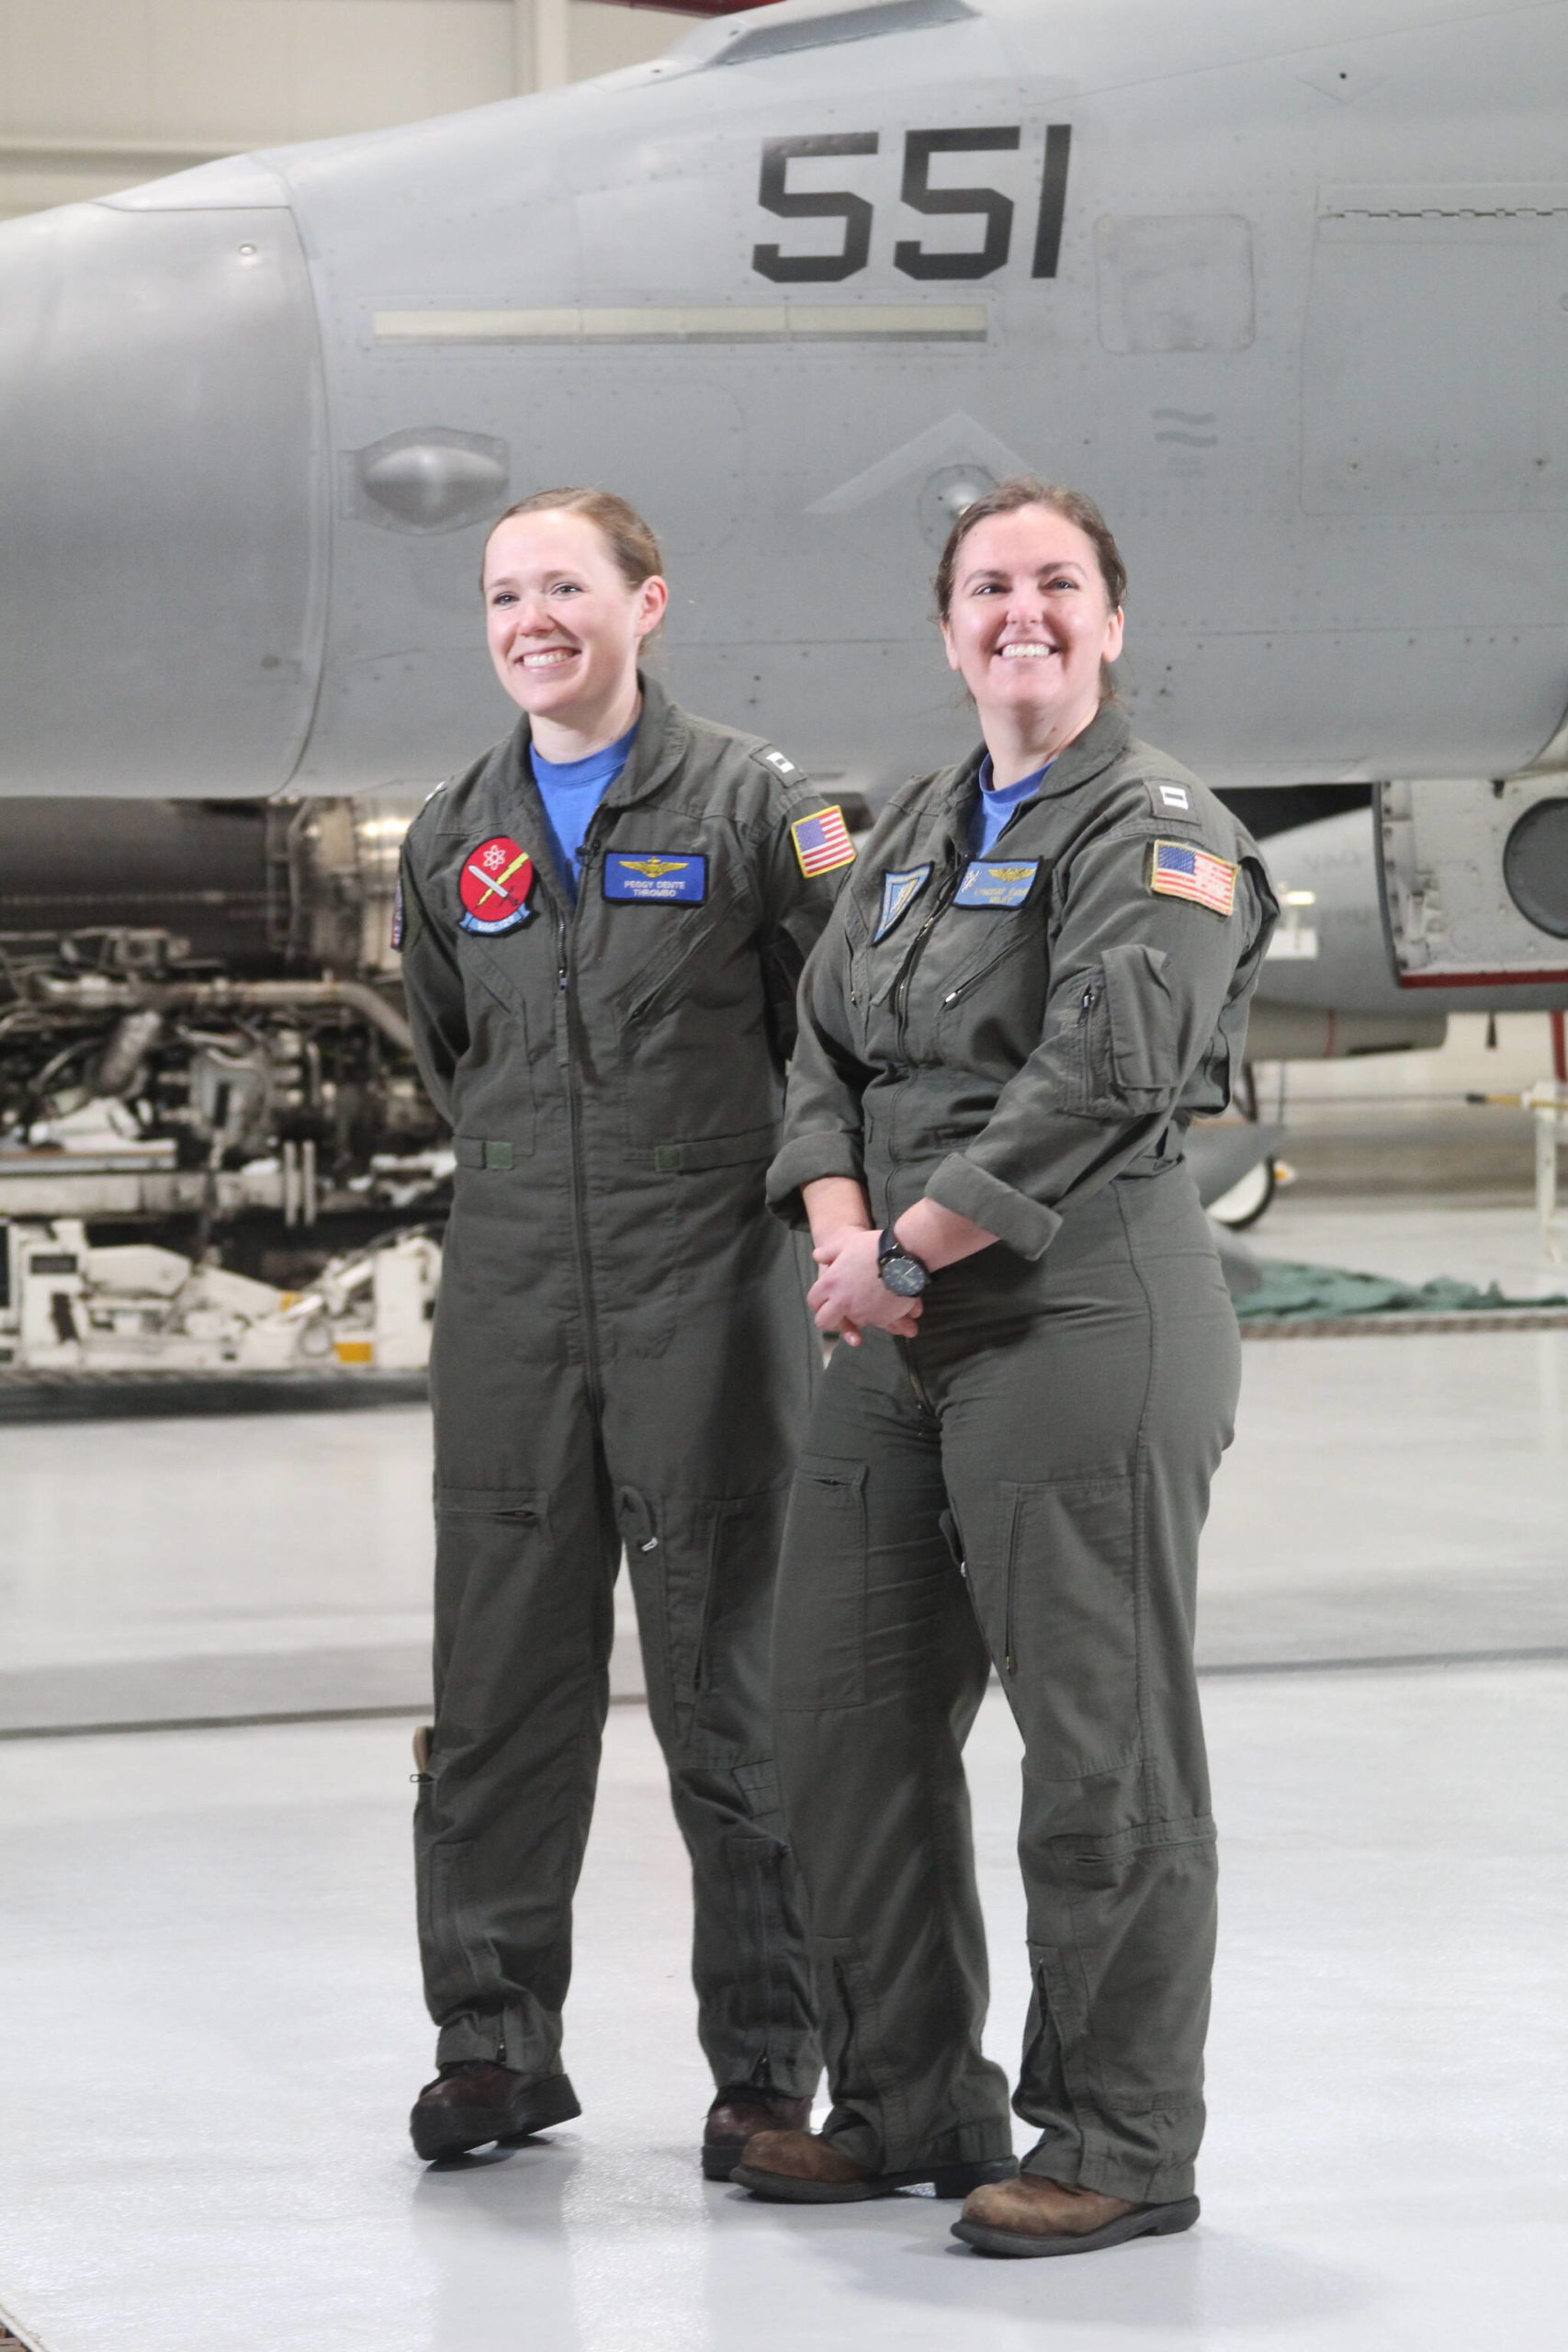 Photo by Karina Andrew/Whidbey News-Times
Lt. Peggy Dente, left, and Lt. Lyndsay Evans will take part in the flyover at the Super Bowl this Sunday.